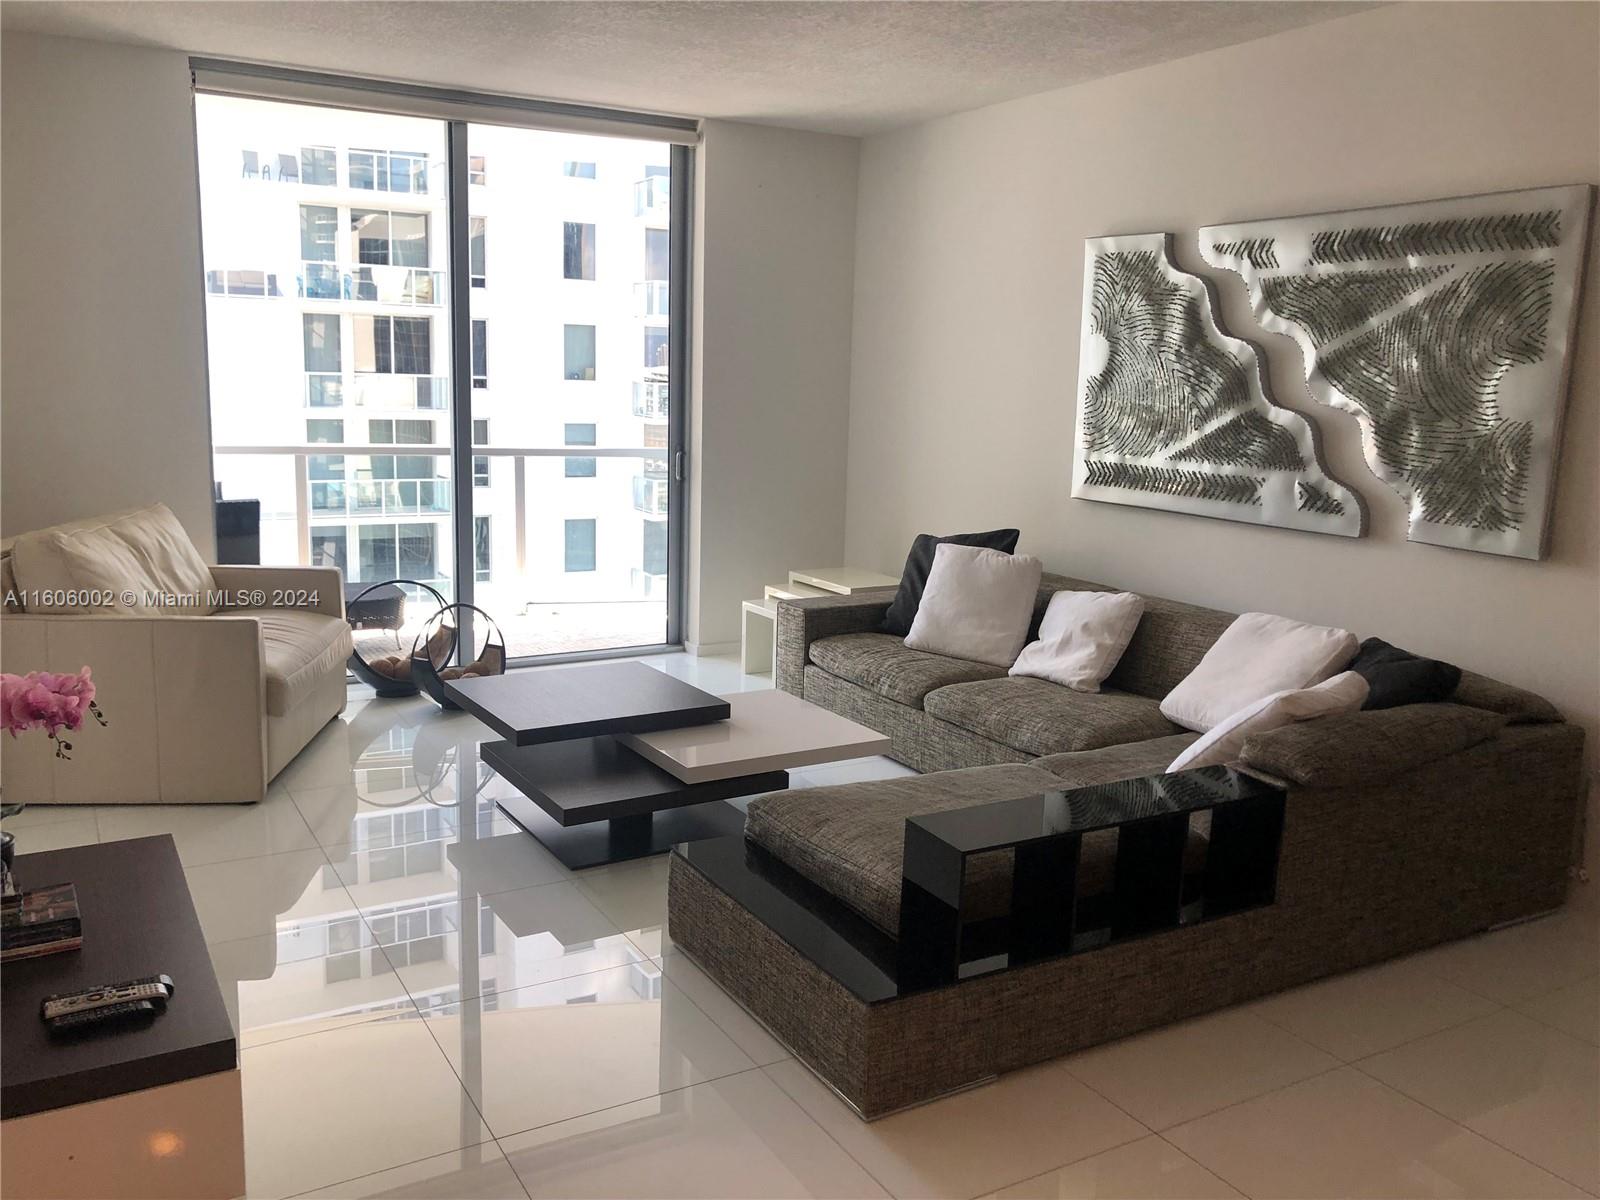 Beautiful 1 BED/1 BATH furnished apartment. Elegant and modern Furniture. Stainless steel appliances. Prime Location in Brickell Avenue, close to everything, walking distance to restaurants, shopping, offices, etc. 24-hour attended lobby and security. Recreational facilities include swimming pool, sun deck, activity room, pool table, exercise room, spa, golf simulator, etc.
*Facade concrete restoration work is underway on the 1060 tower.